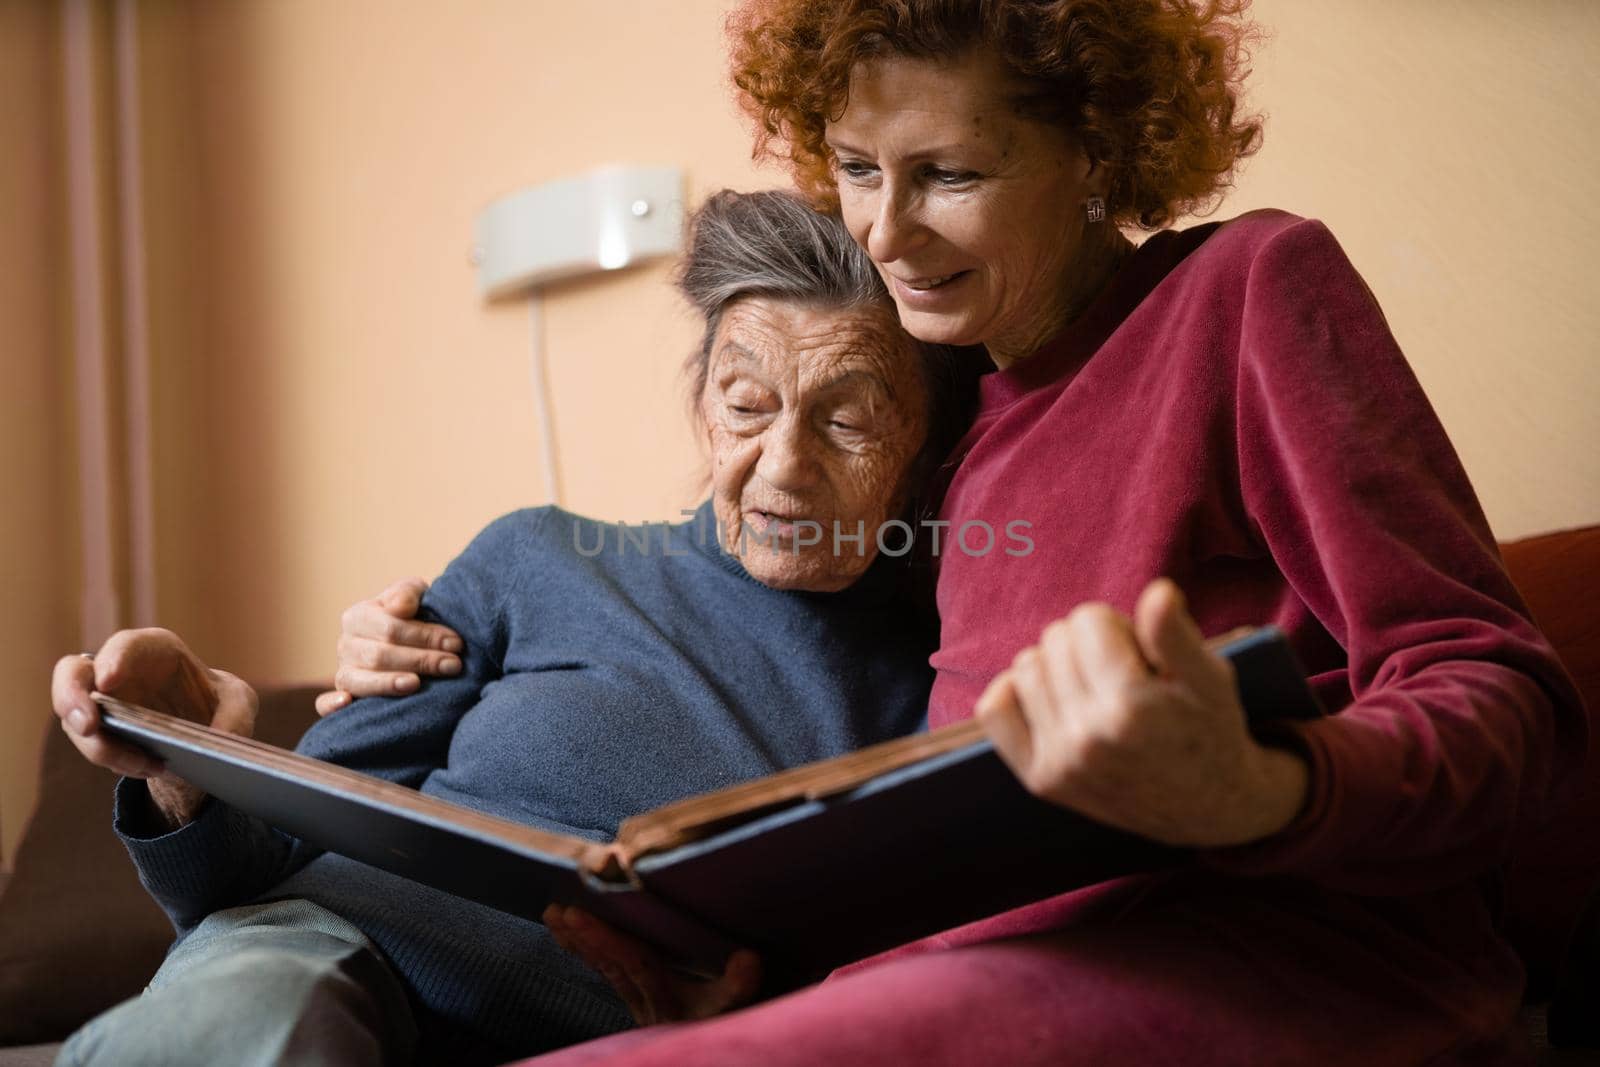 Senior woman and her adult daughter looking at photo album together on couch in living room, talking joyful discussing memories. Weekend with parents, family day, thanksgiving, mom's holiday.